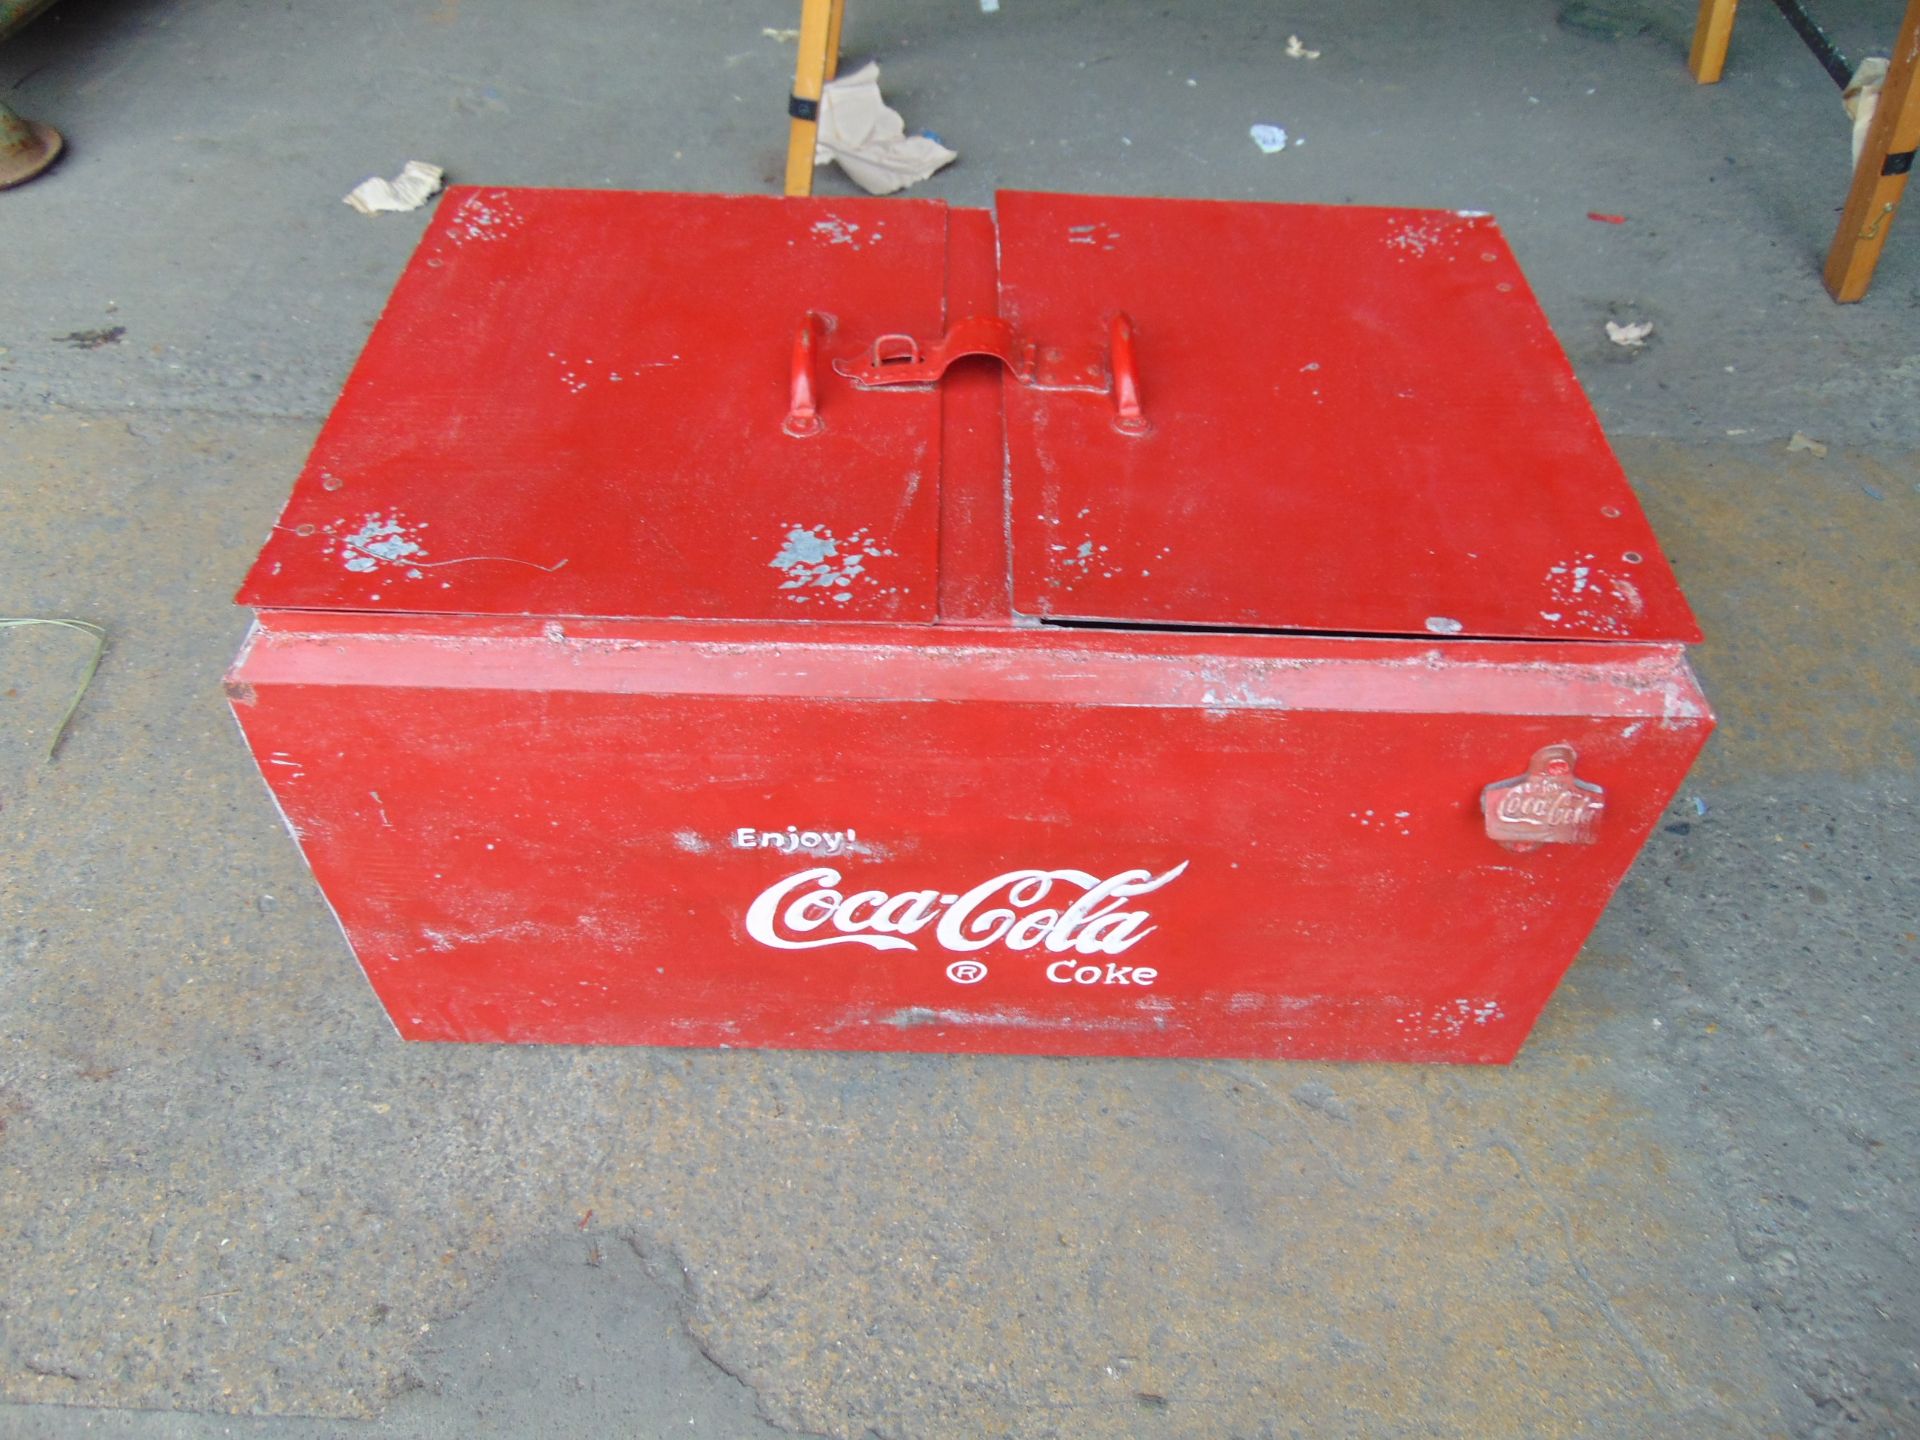 Galvanised Double Coca Cola Cool Box with Bottle Opener etc, Size L 70 x W45 x H44 cms